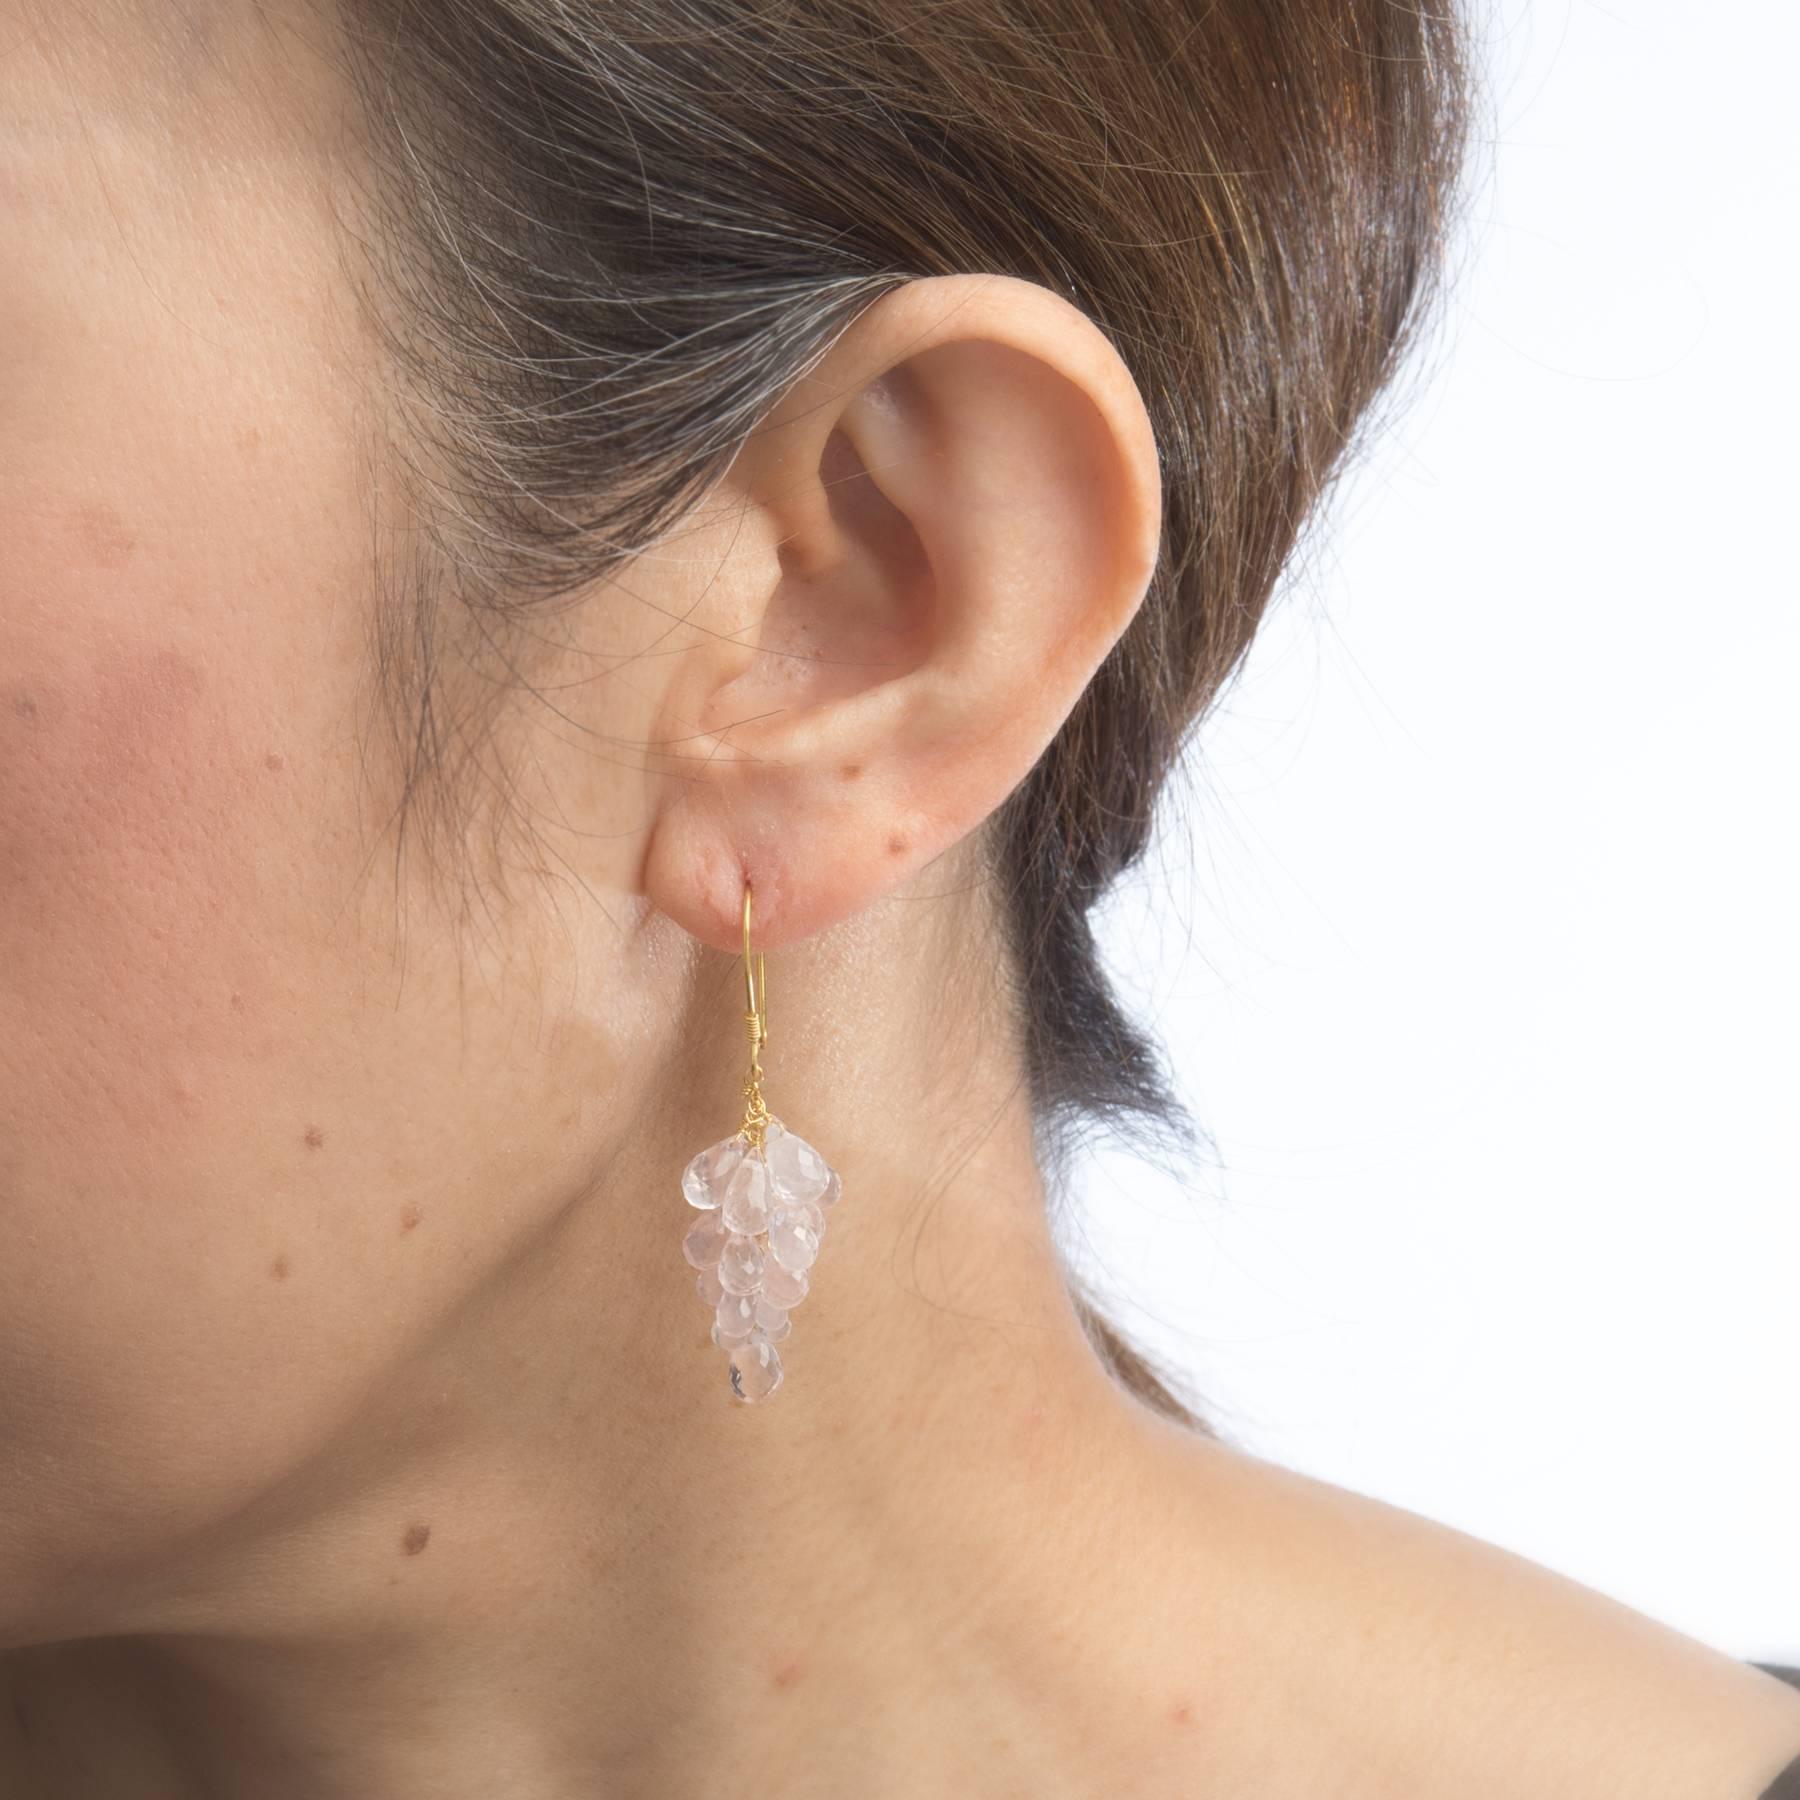 Overview:

Elegant pair of cluster drop earrings, crafted in 18k yellow gold. 

Briolette faceted rose quartz measures (average) 4mm to 5mm. The rose quartz is in excellent condition and free of cracks or chips.   

The earrings feature fish wire